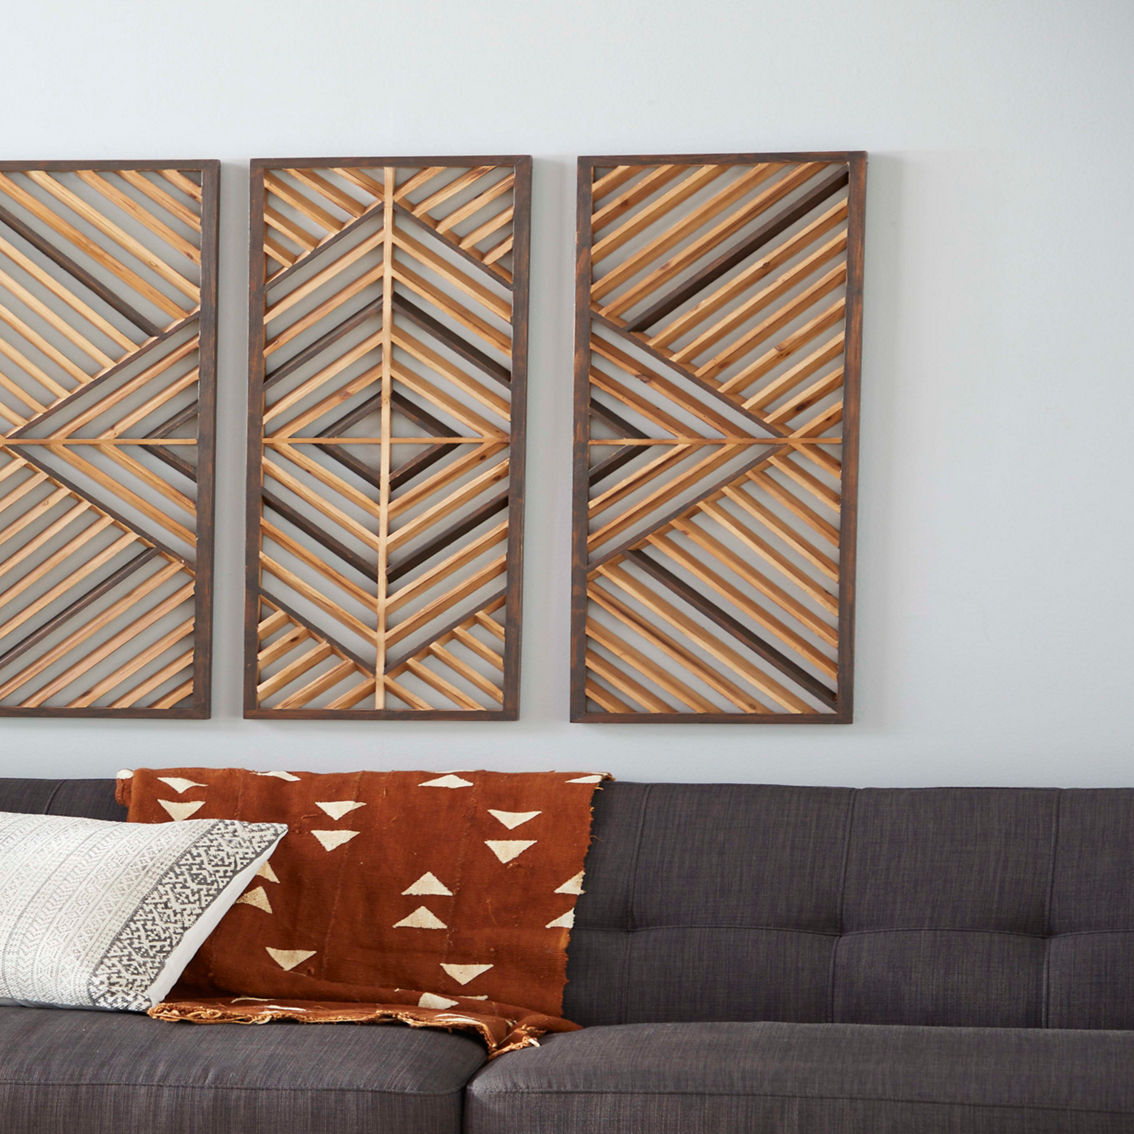 Morgan Hill Home Contemporary Brown Wood Wall Decor Set - Image 3 of 5